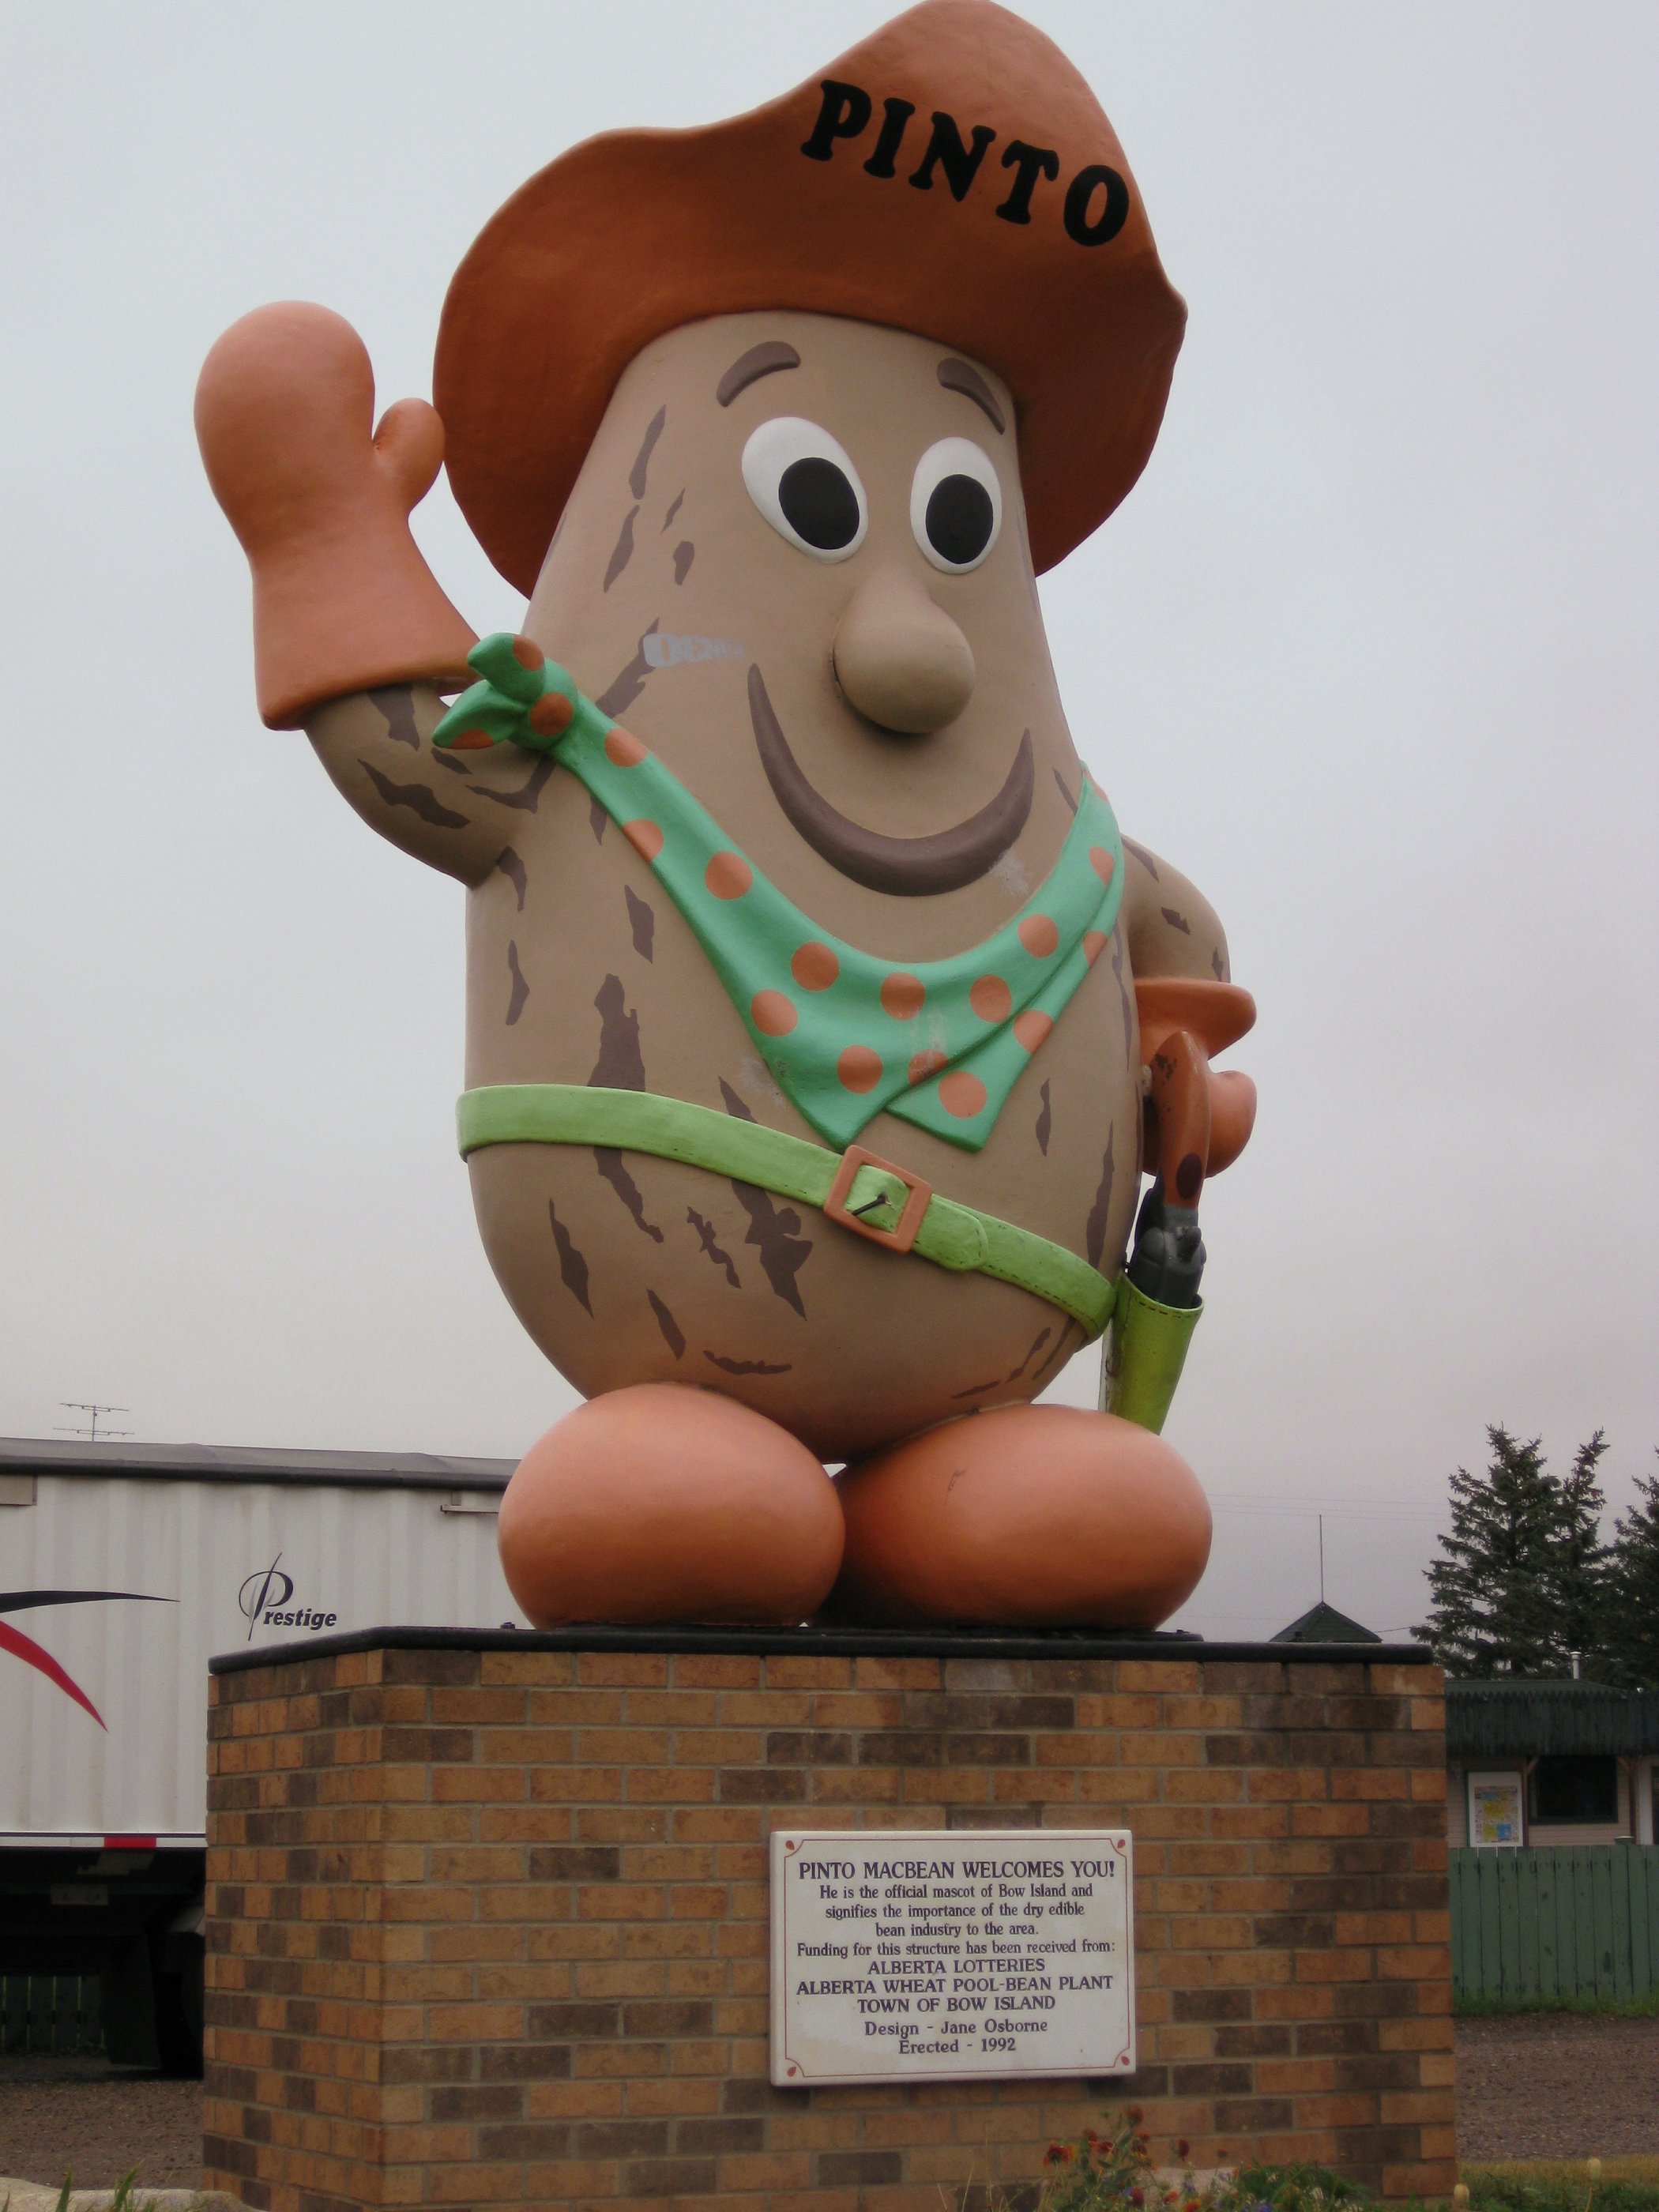 Bow Island's mascot Pinto Macbean statue placed by the town of Bow Valley 